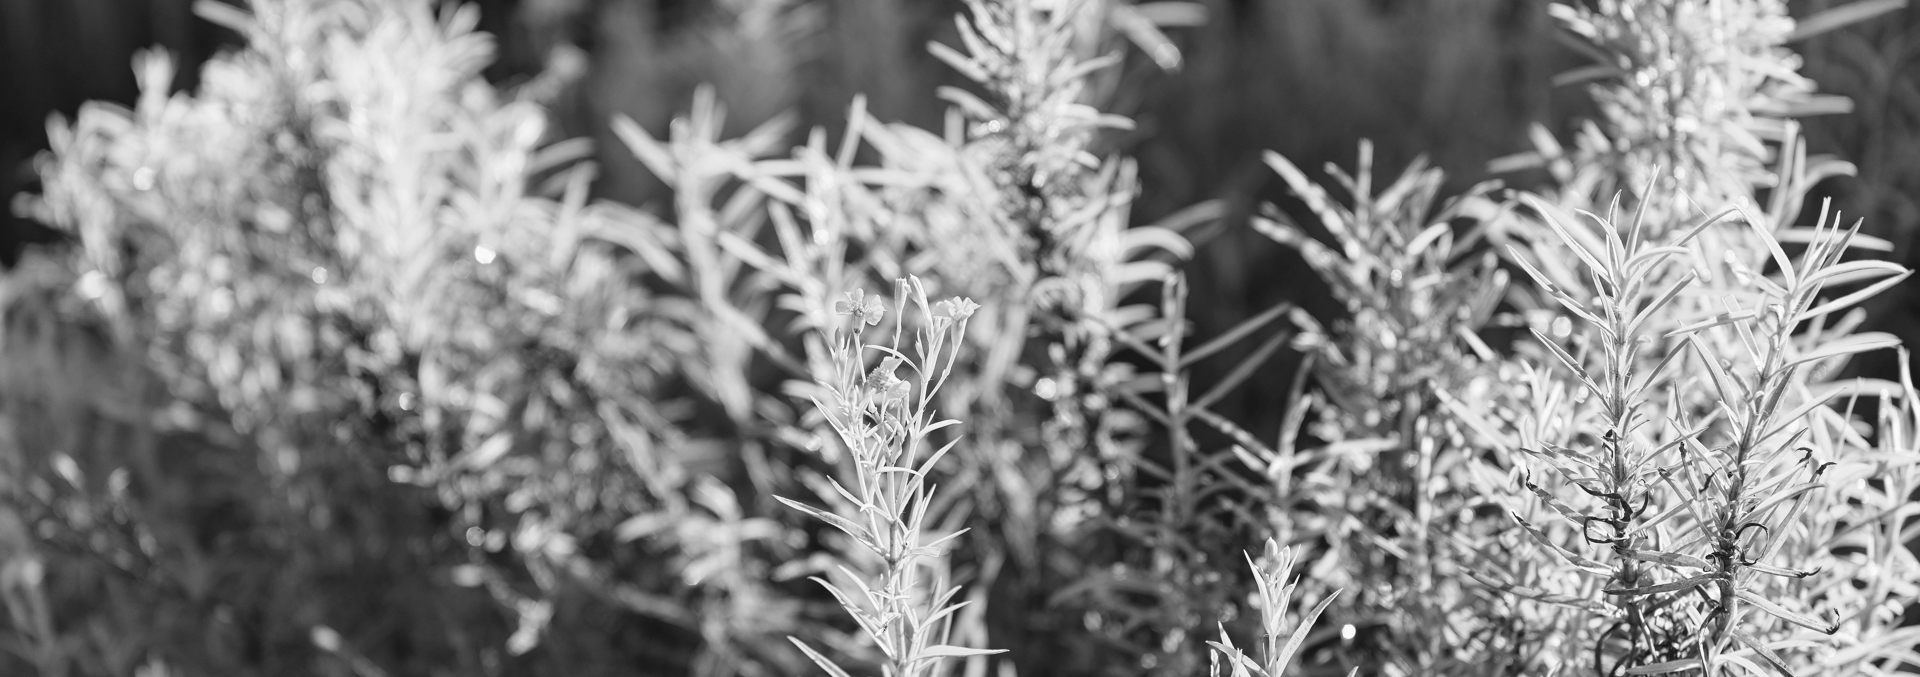 Black and white close up image of herbs from community garden